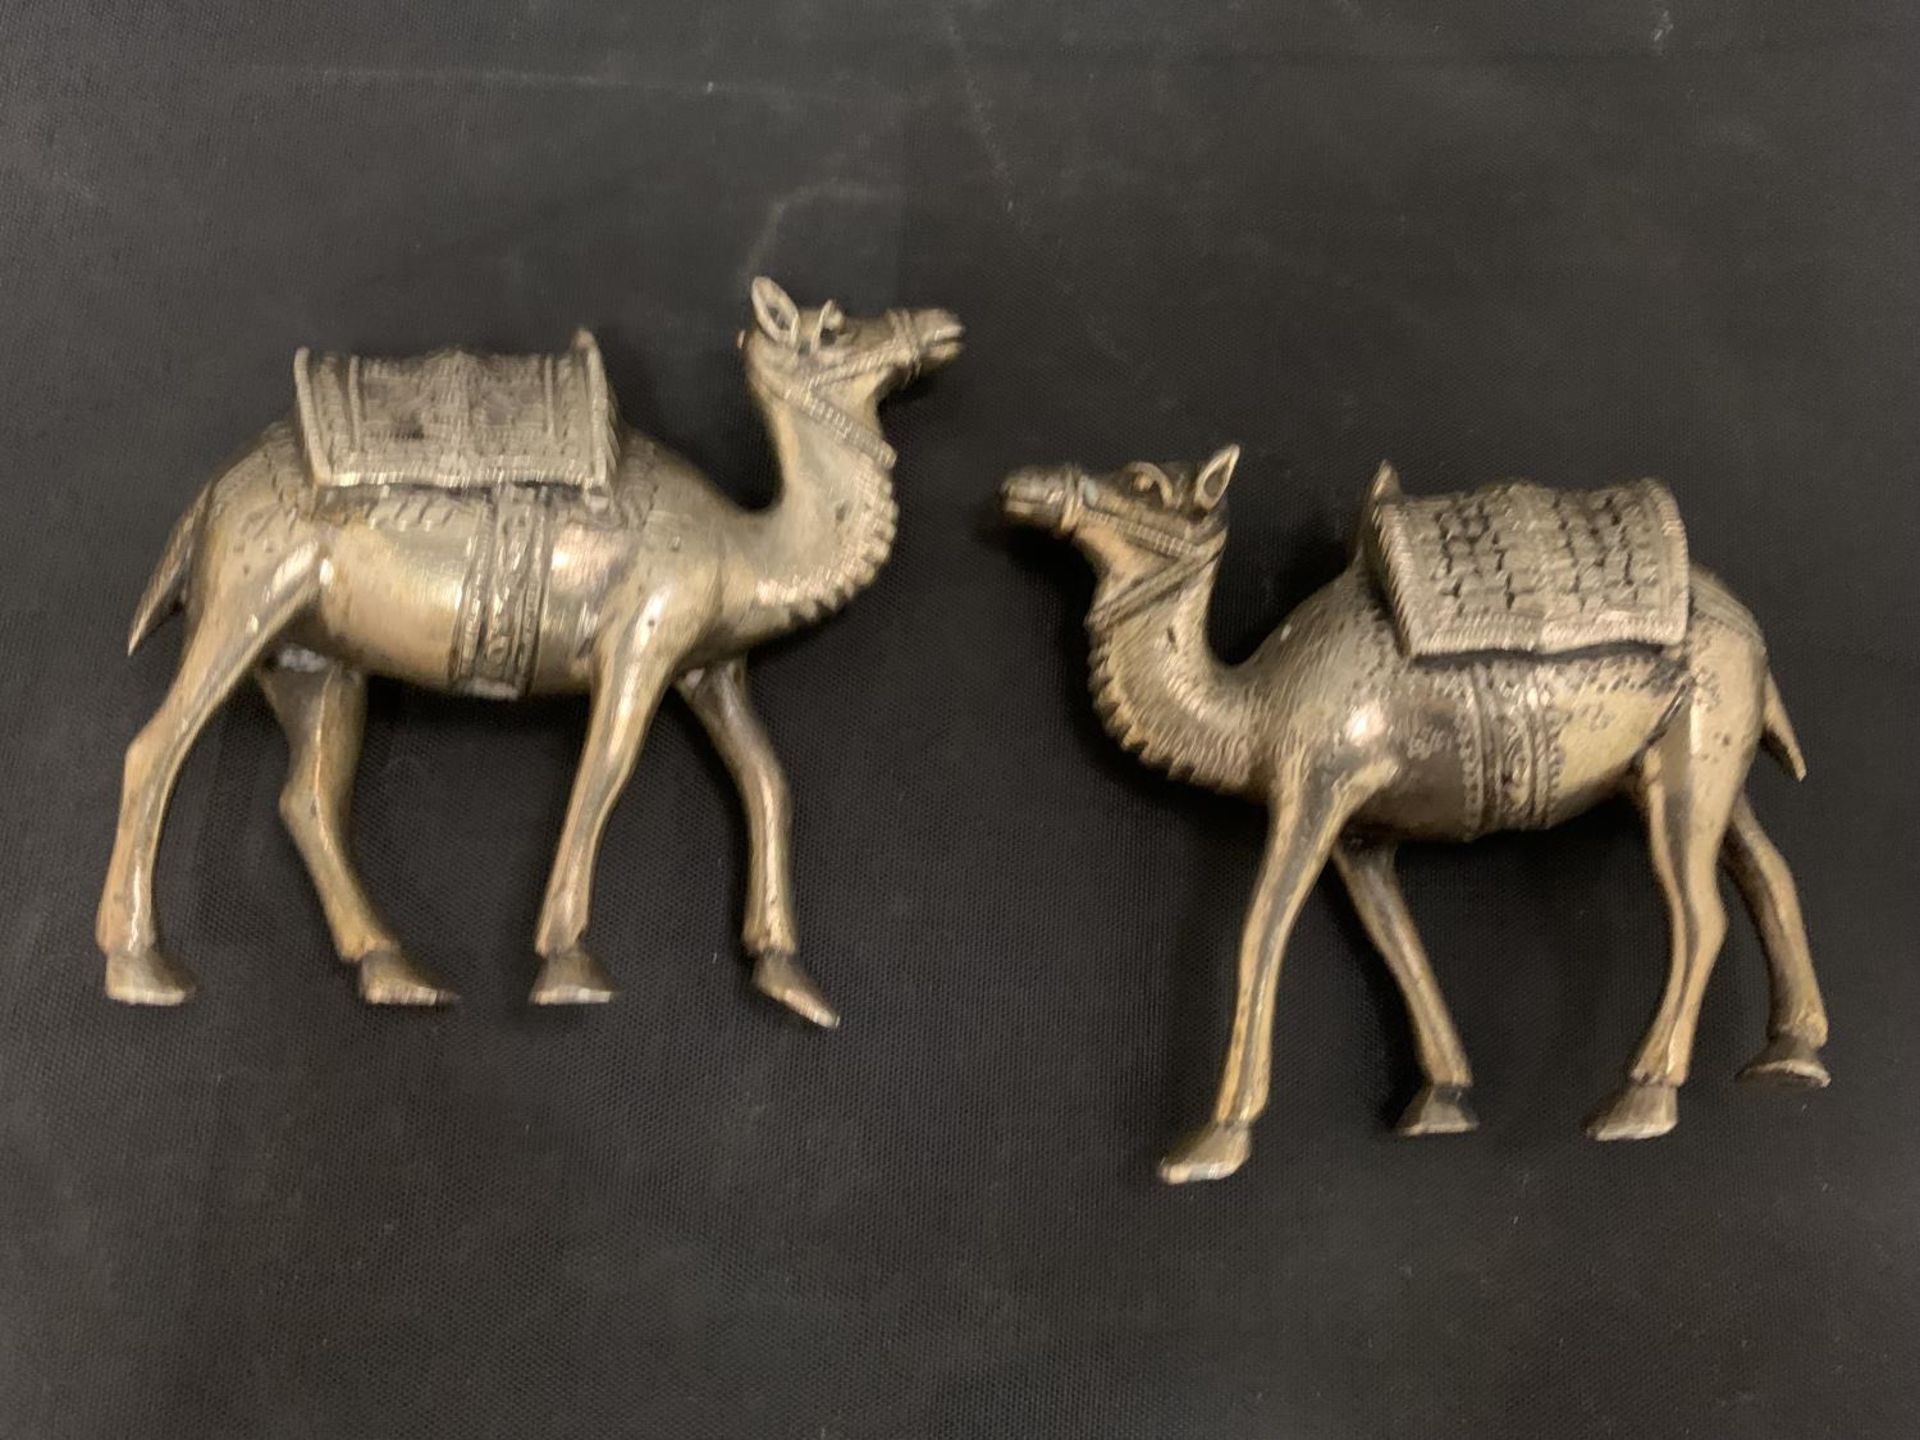 A PAIR OF METAL CAMEL ORNAMENTS, HEIGHT 7.5CM